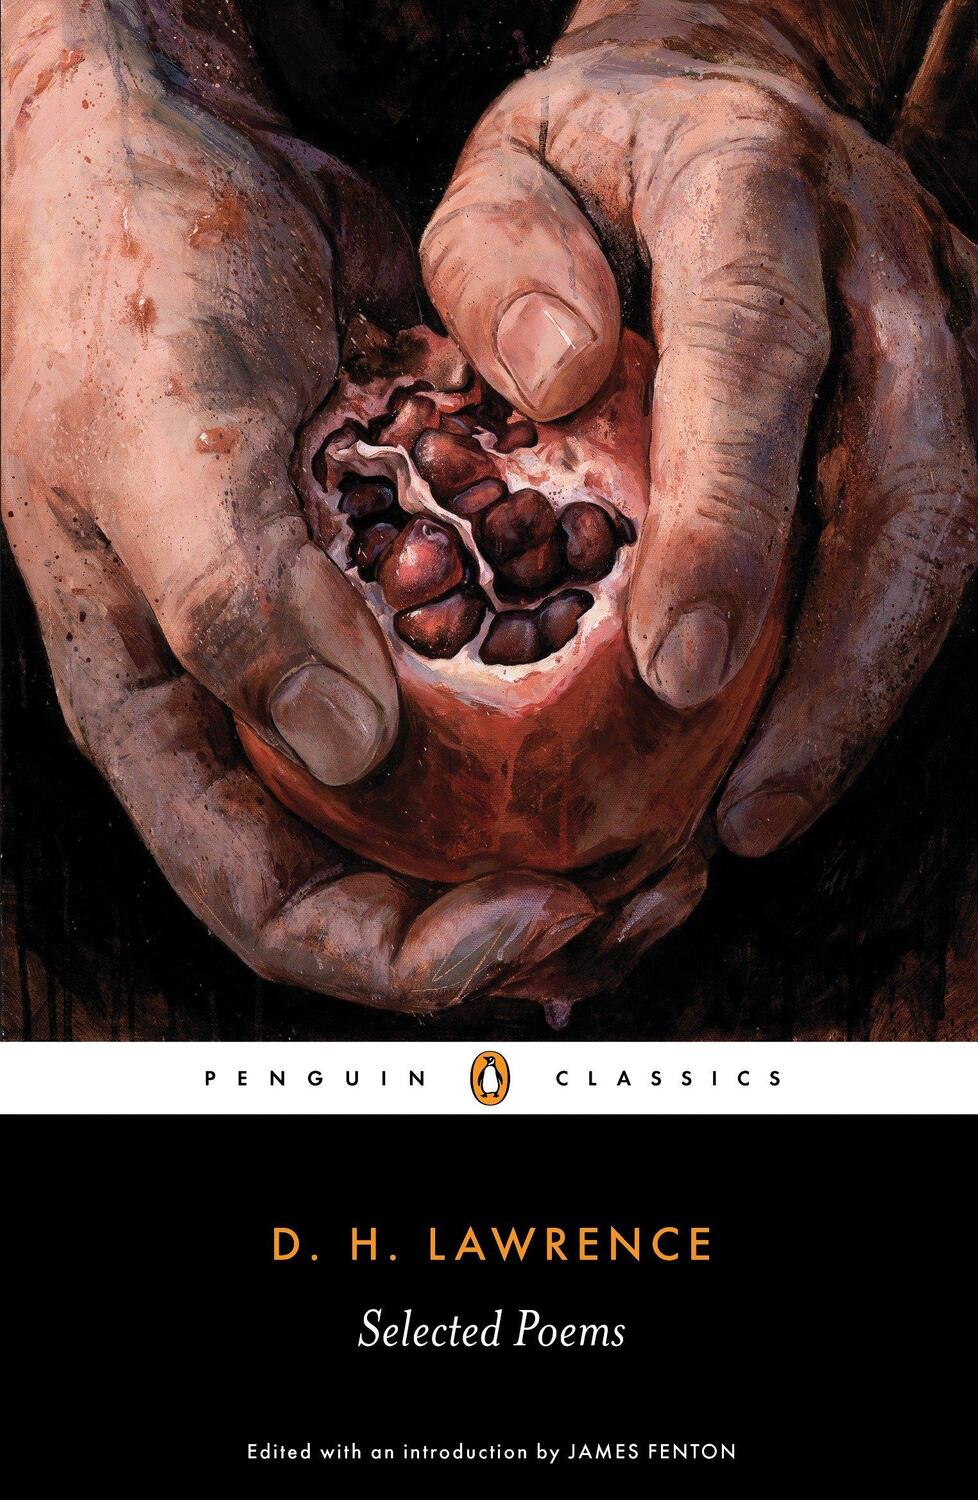 Cover: 9780140424584 | Lawrence, D: Selected Poems | D H Lawrence | Penguin Classics | 2008